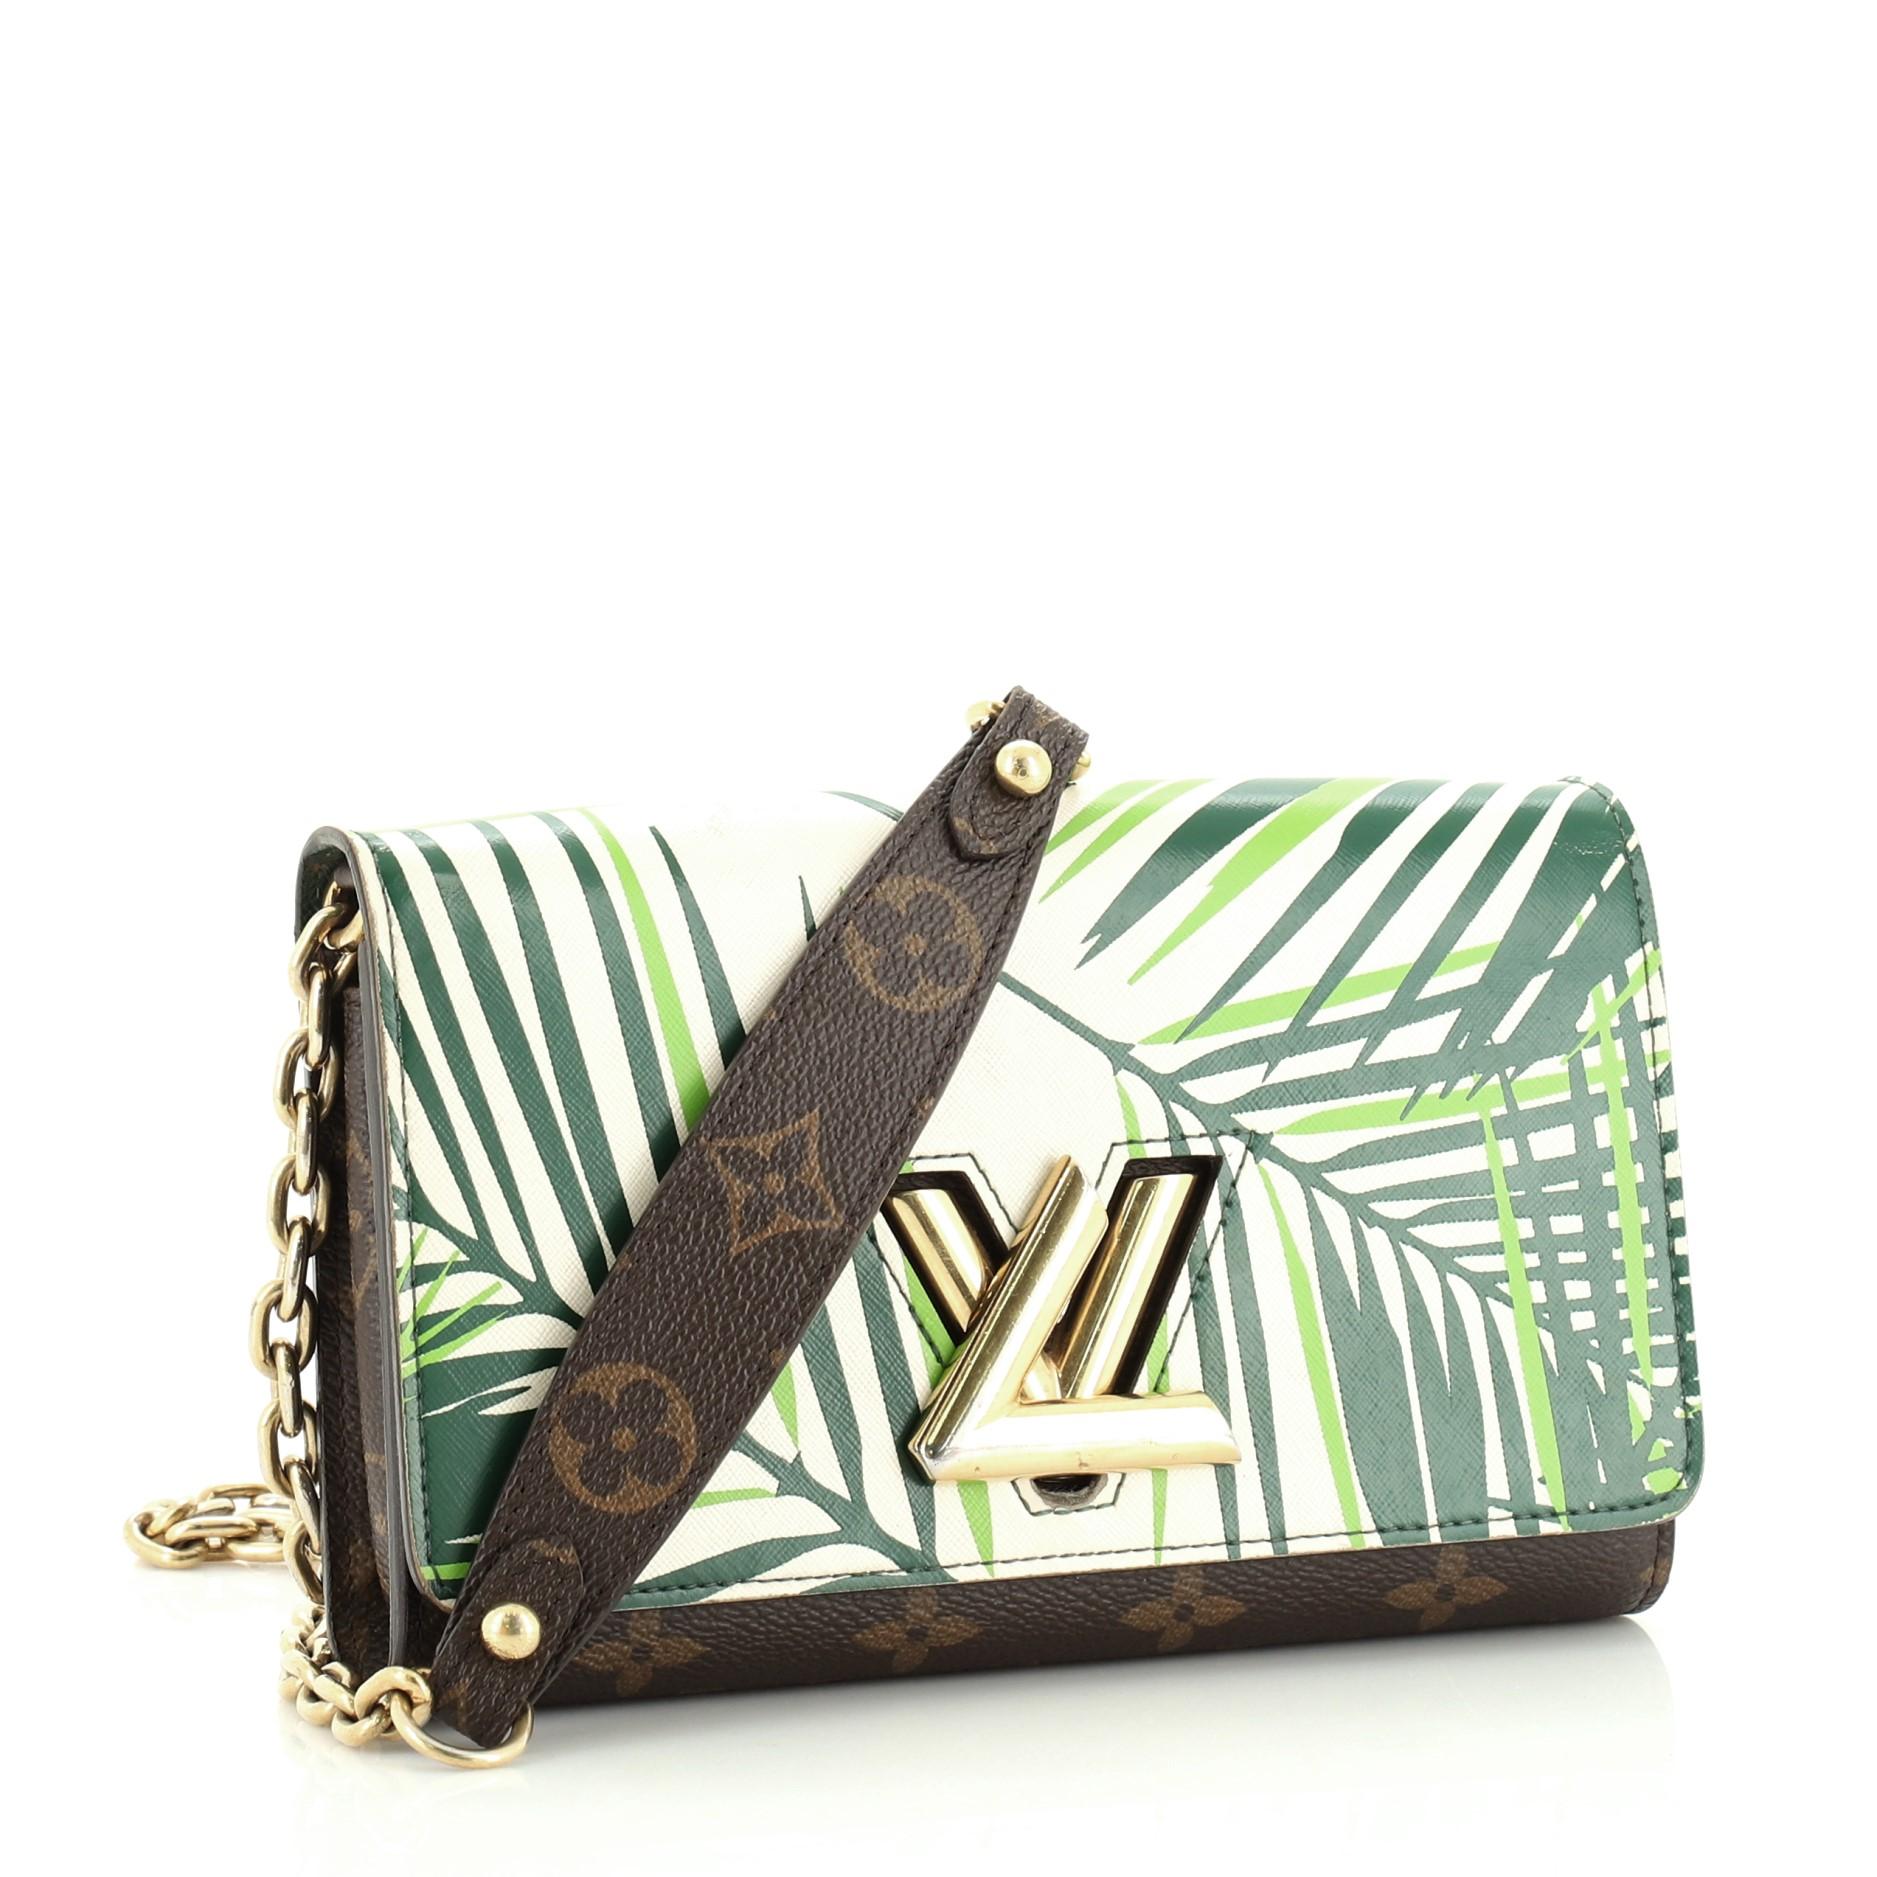 This Louis Vuitton Twist Chain Wallet Limited Edition Palm Print Leather with Monogram Canvas, crafted in green printed leather with brown monogram coated canvas, features chain strap with leather pad and gold-tone hardware. Its LV twist lock